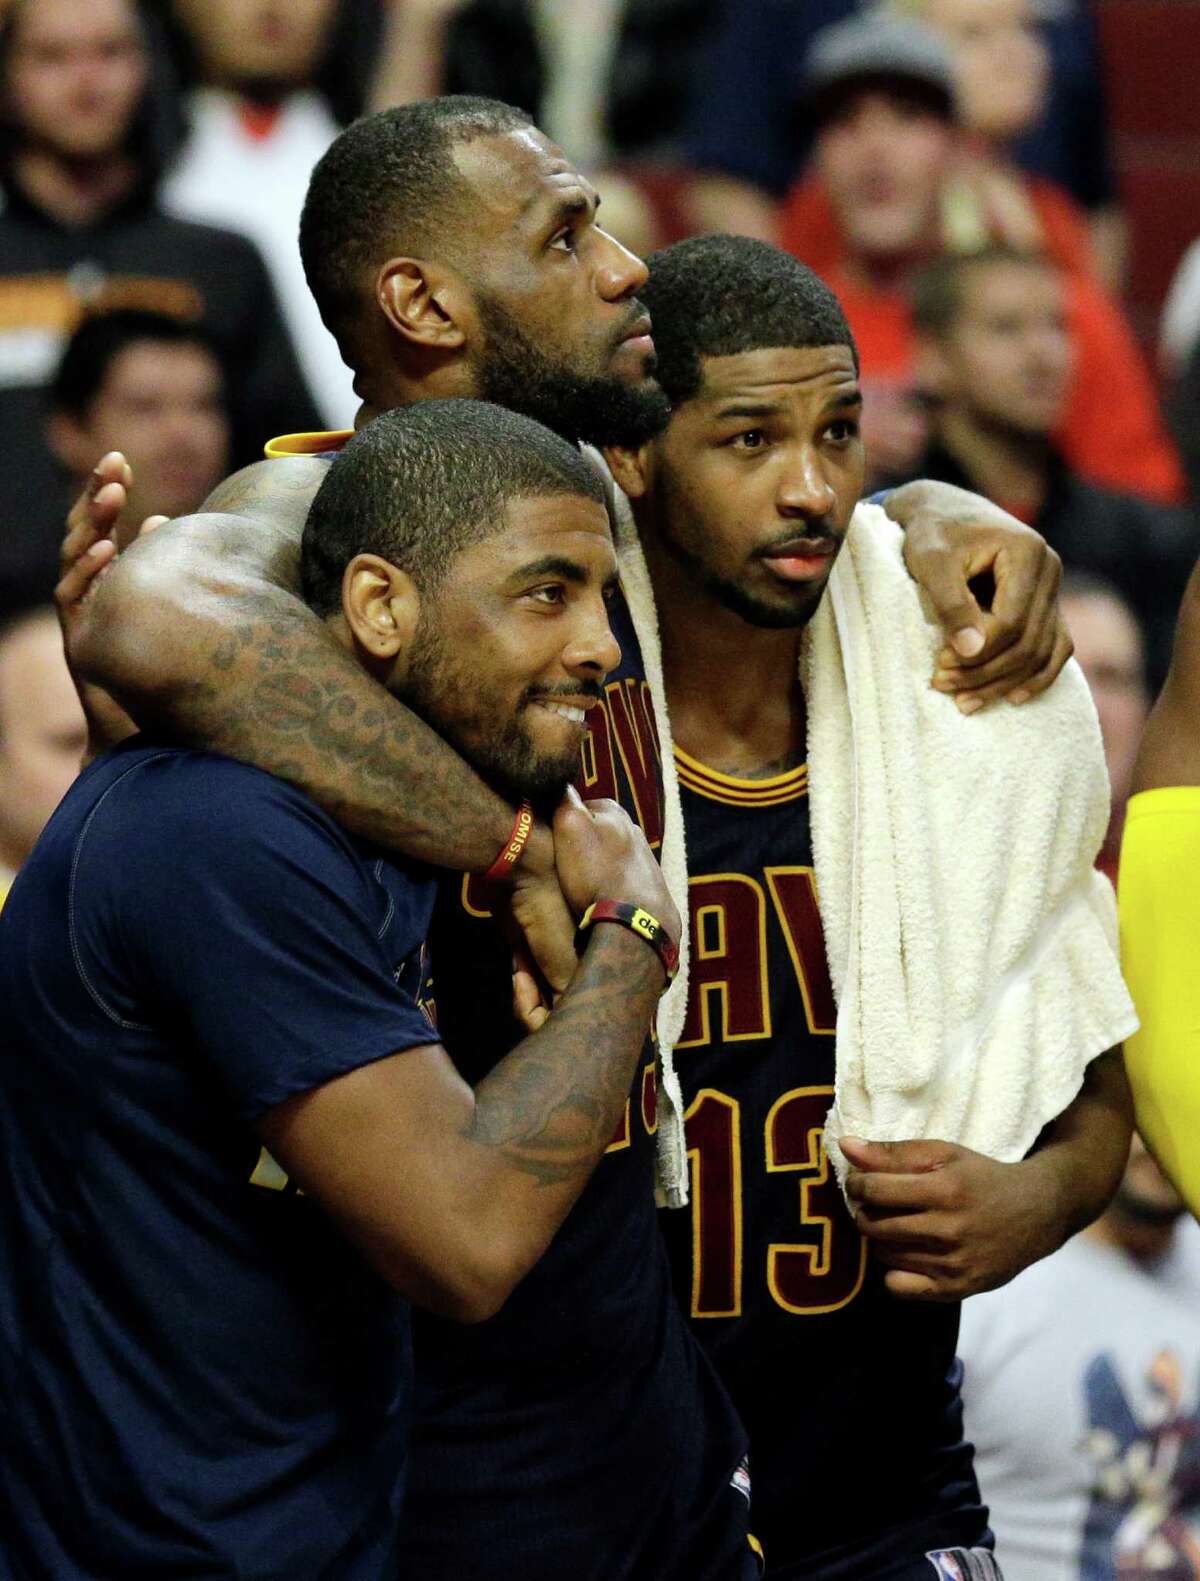 Cleveland Cavaliers forward LeBron James (center) watches the end of the game against the Chicago Bulls with guard Kyrie Irving (left) and center Tristan Thompson during the second half of Game 6 in a second-round playoff series in Chicago on May 14, 2015.